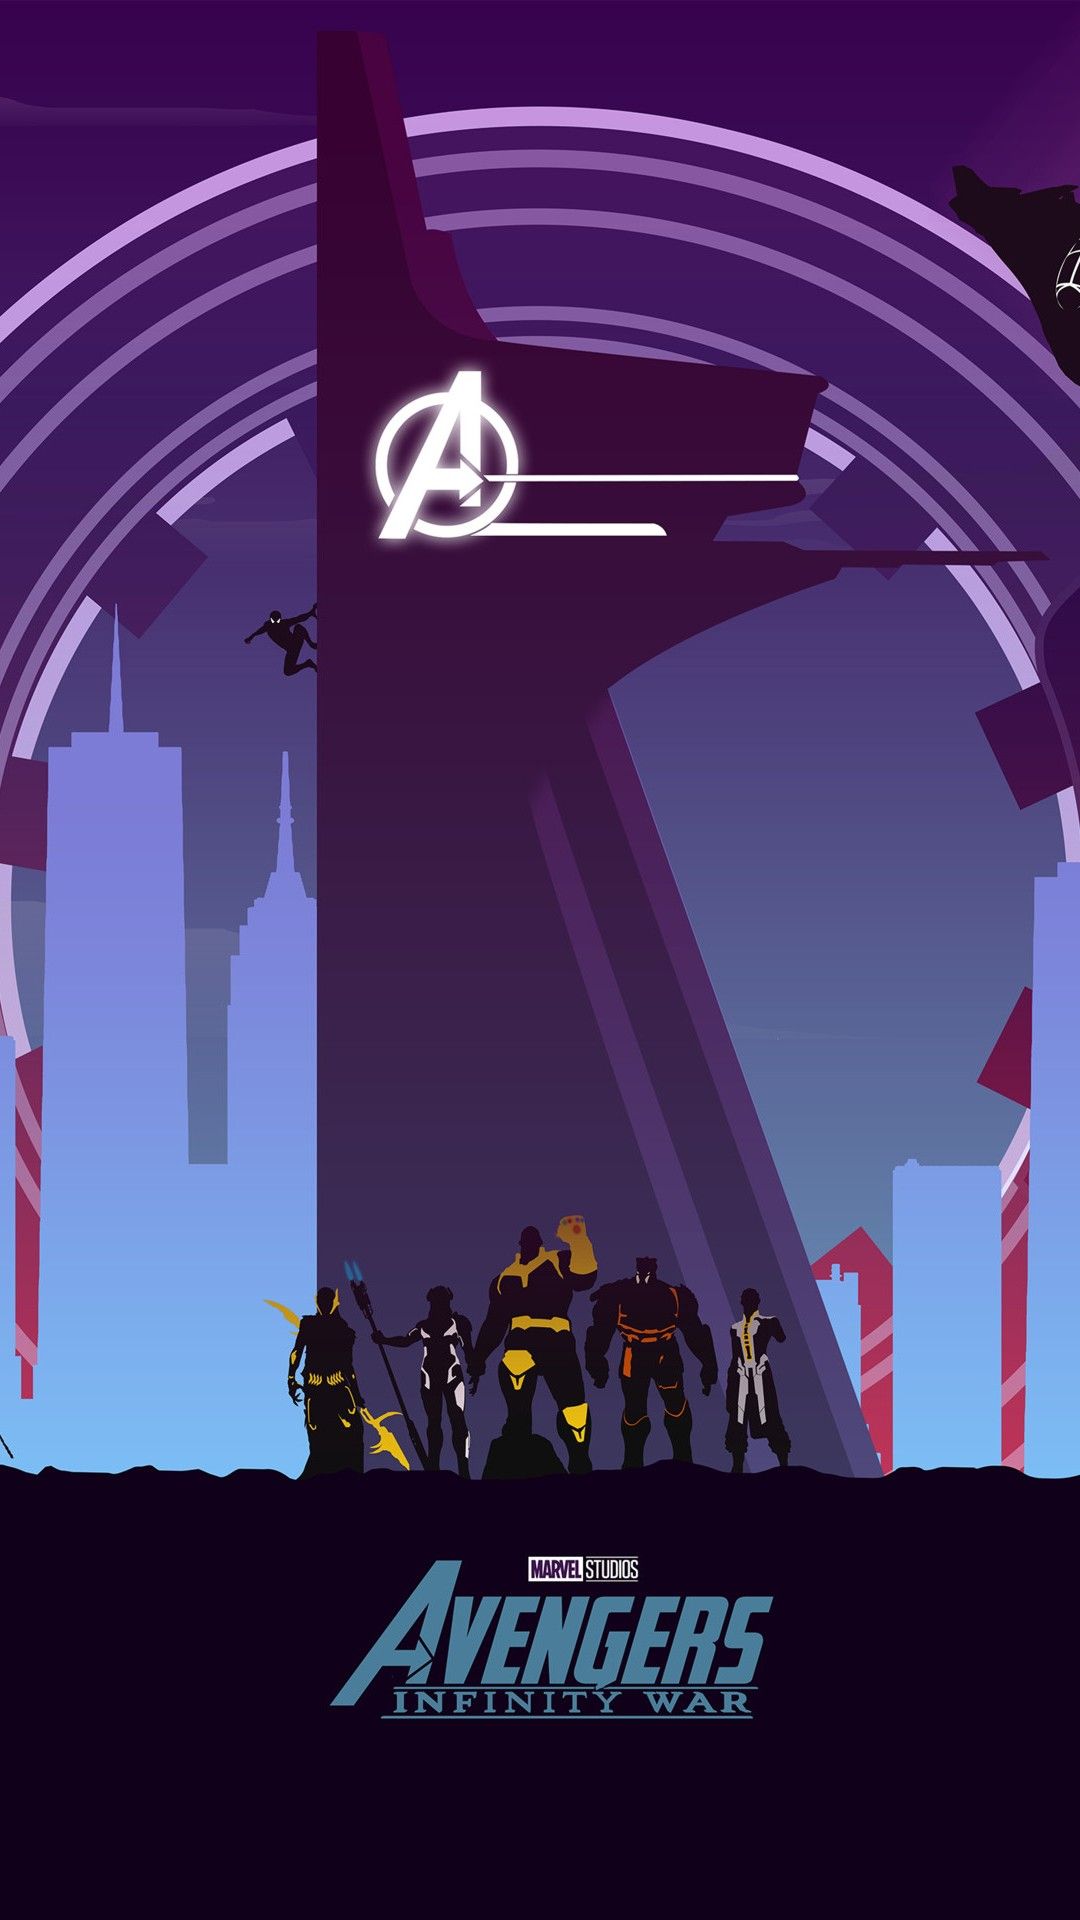 Marvel Aesthetic Wallpapers  Wallpaper Cave